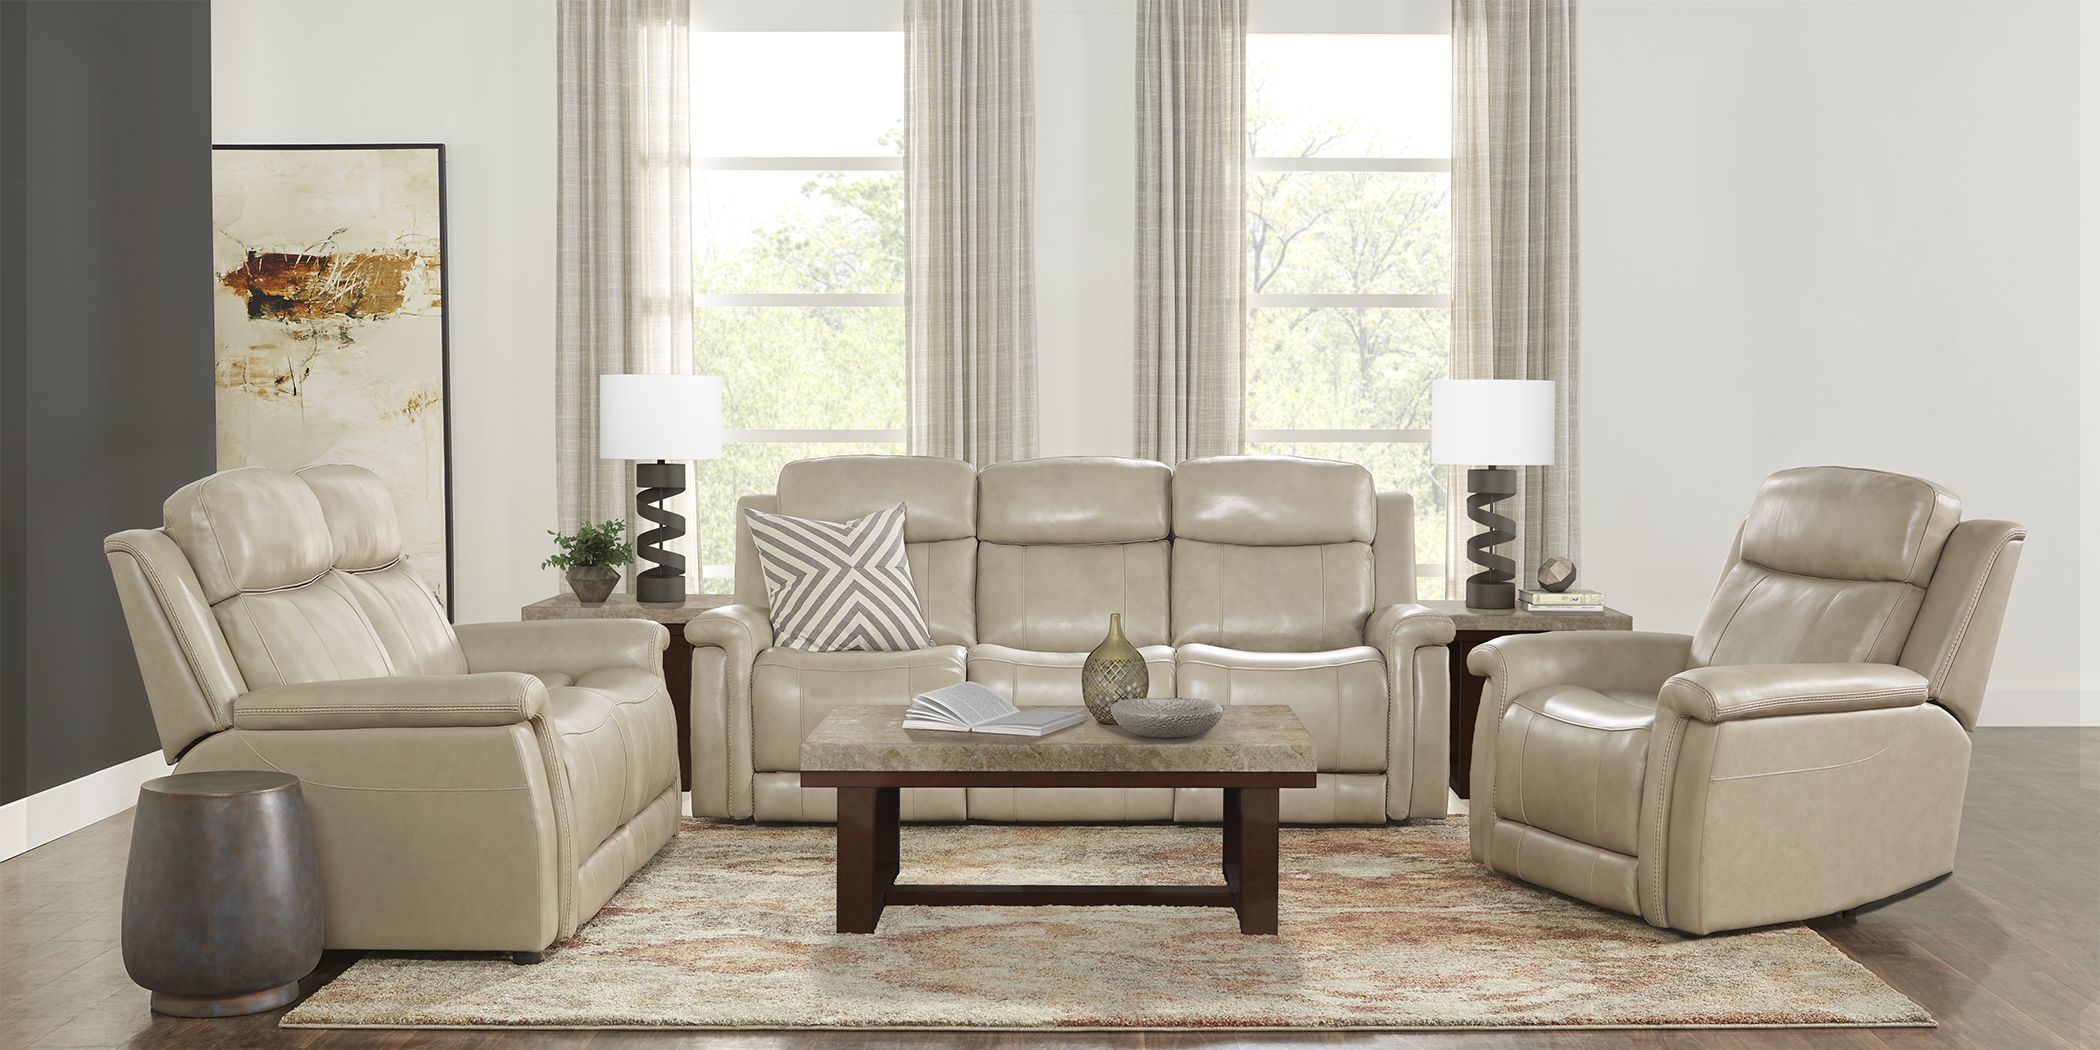 Orsini Beige Leather 7 Pc Living Room with Dual Power Reclining Sofa ...